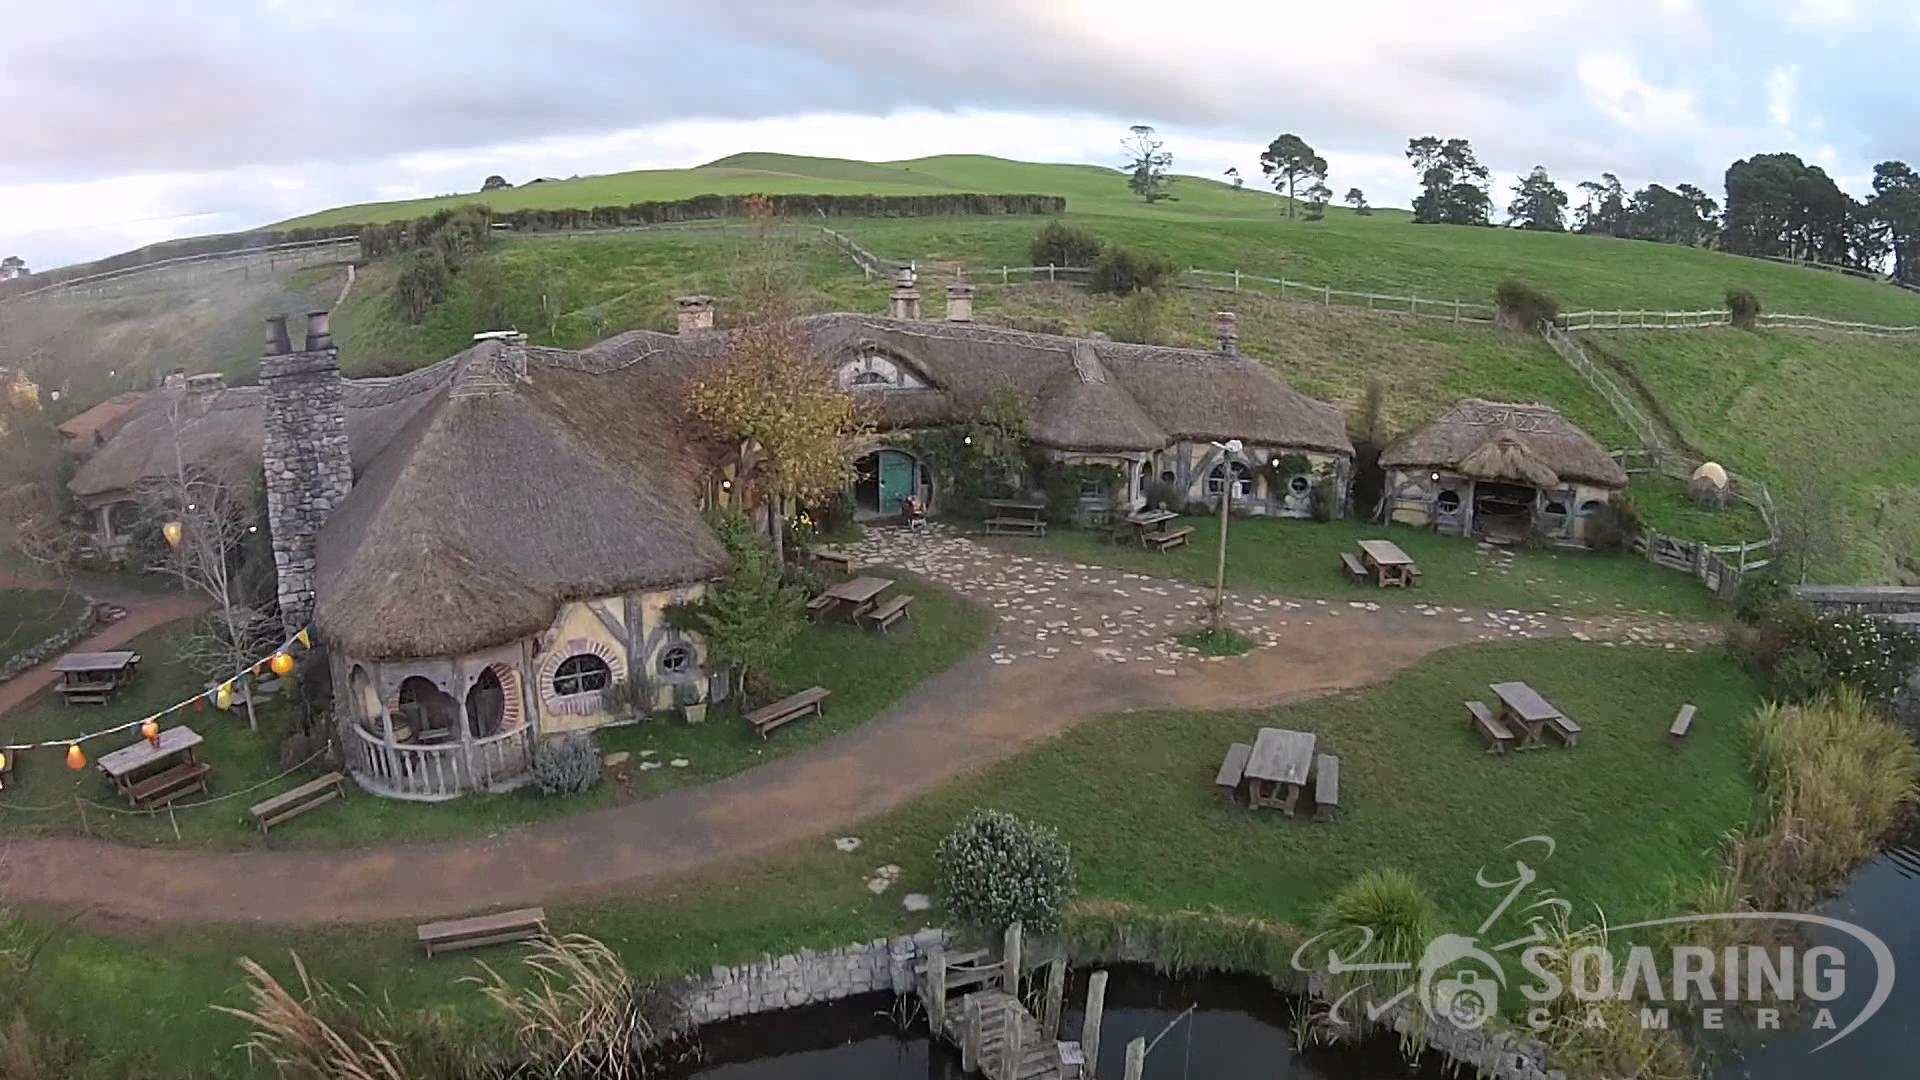 1920x1080 Aerial of New Zealand: Hobbiton, Milford Sound, Queenstown & more! - YouTube